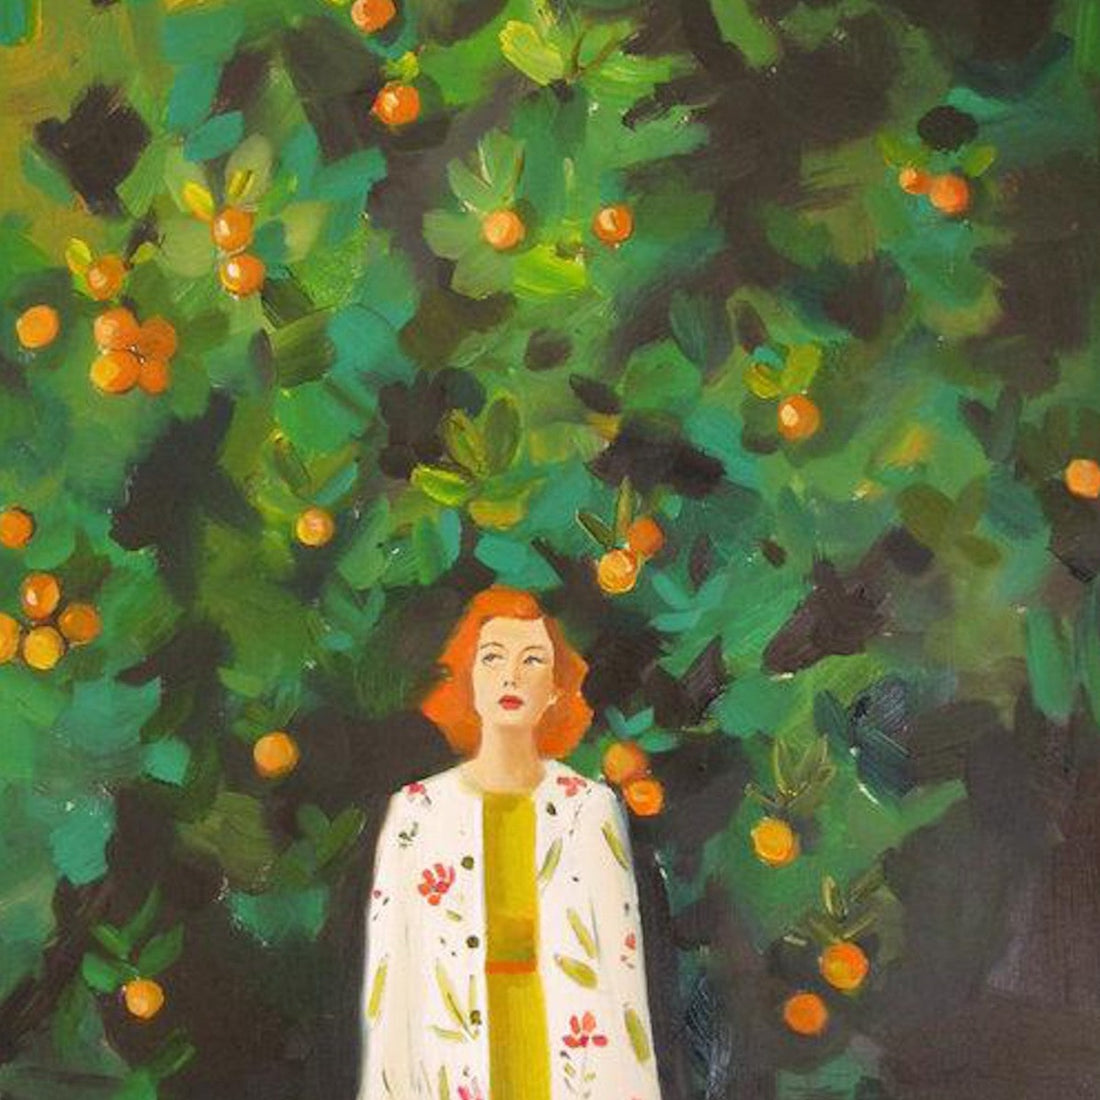 Janet Hill, a fine artist known for her unique painting style, captures the essence of a woman standing gracefully amidst vibrant orange trees in her Lost in Miami Small Art Print.